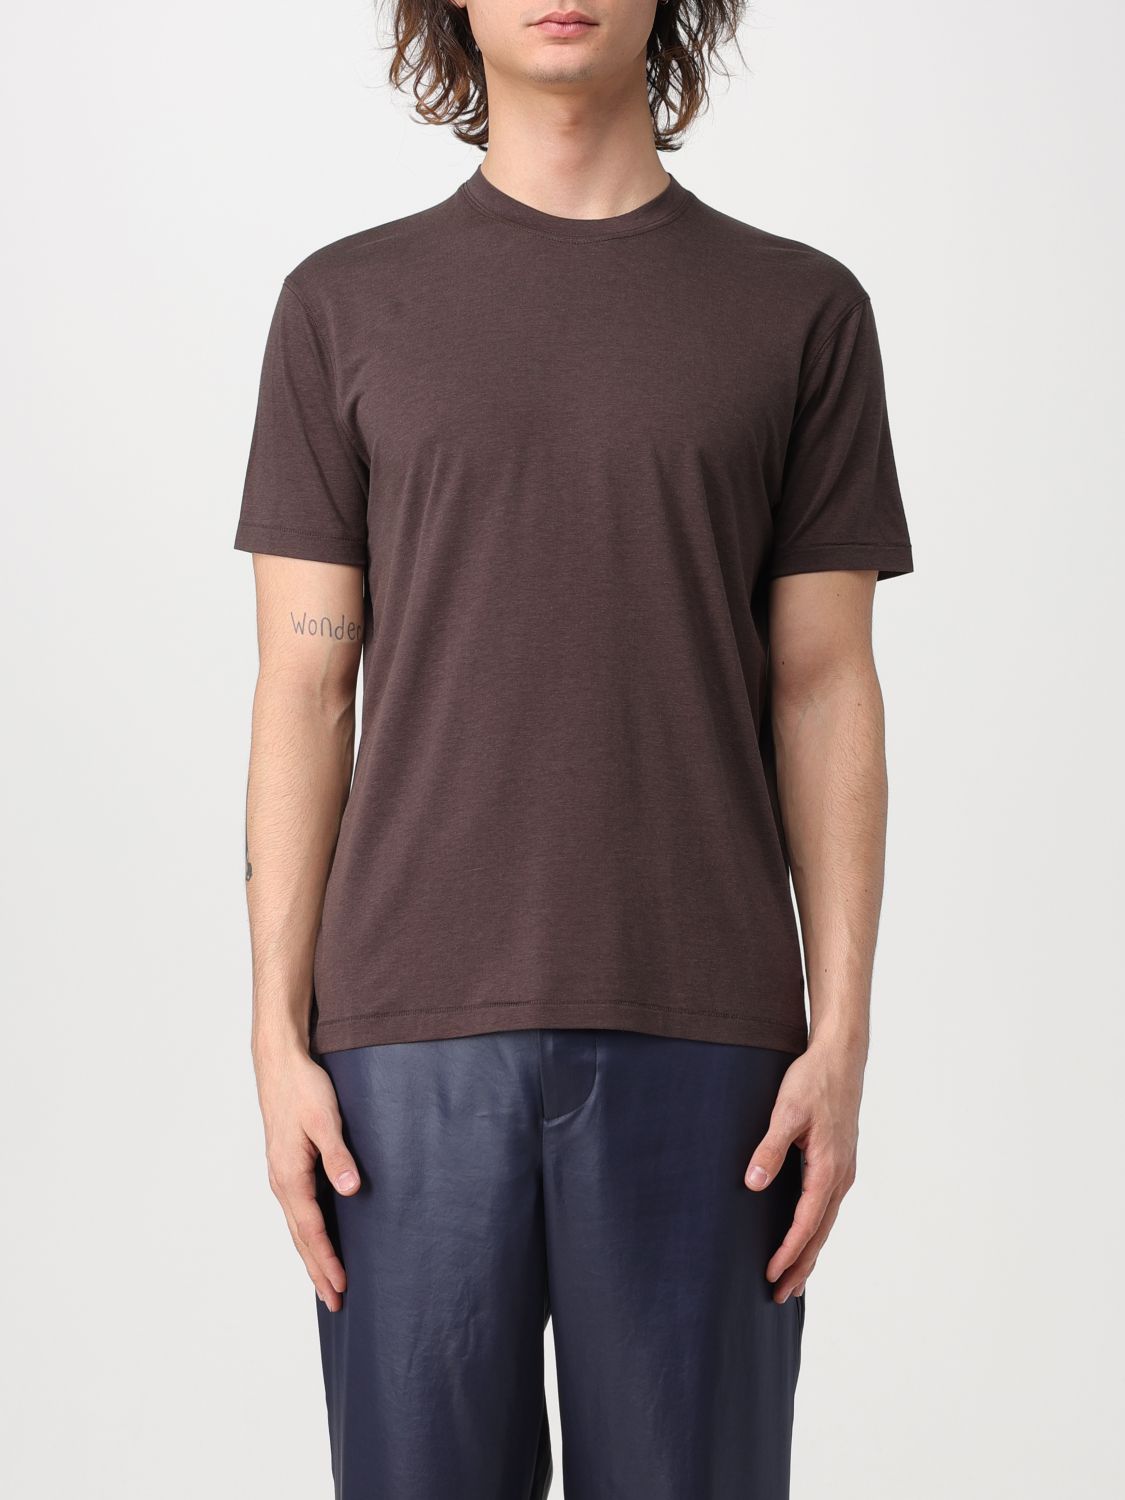 TOM FORD T-SHIRT TOM FORD MEN COLOR COCOA,F11343113